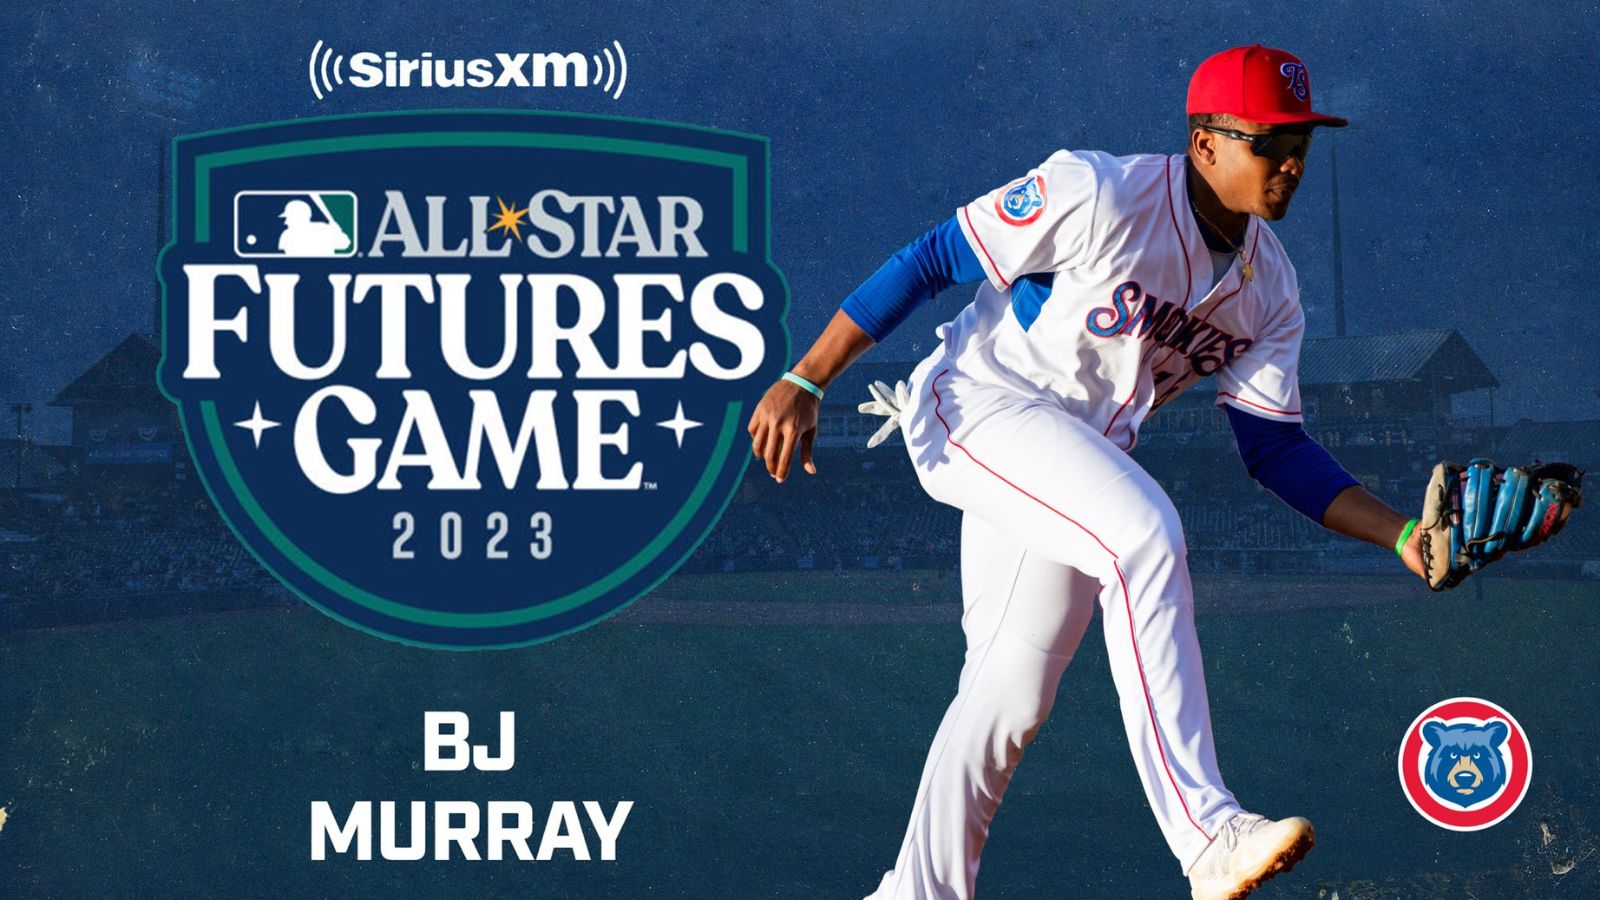 Murray To Play in Minor League All Star Game - Our News